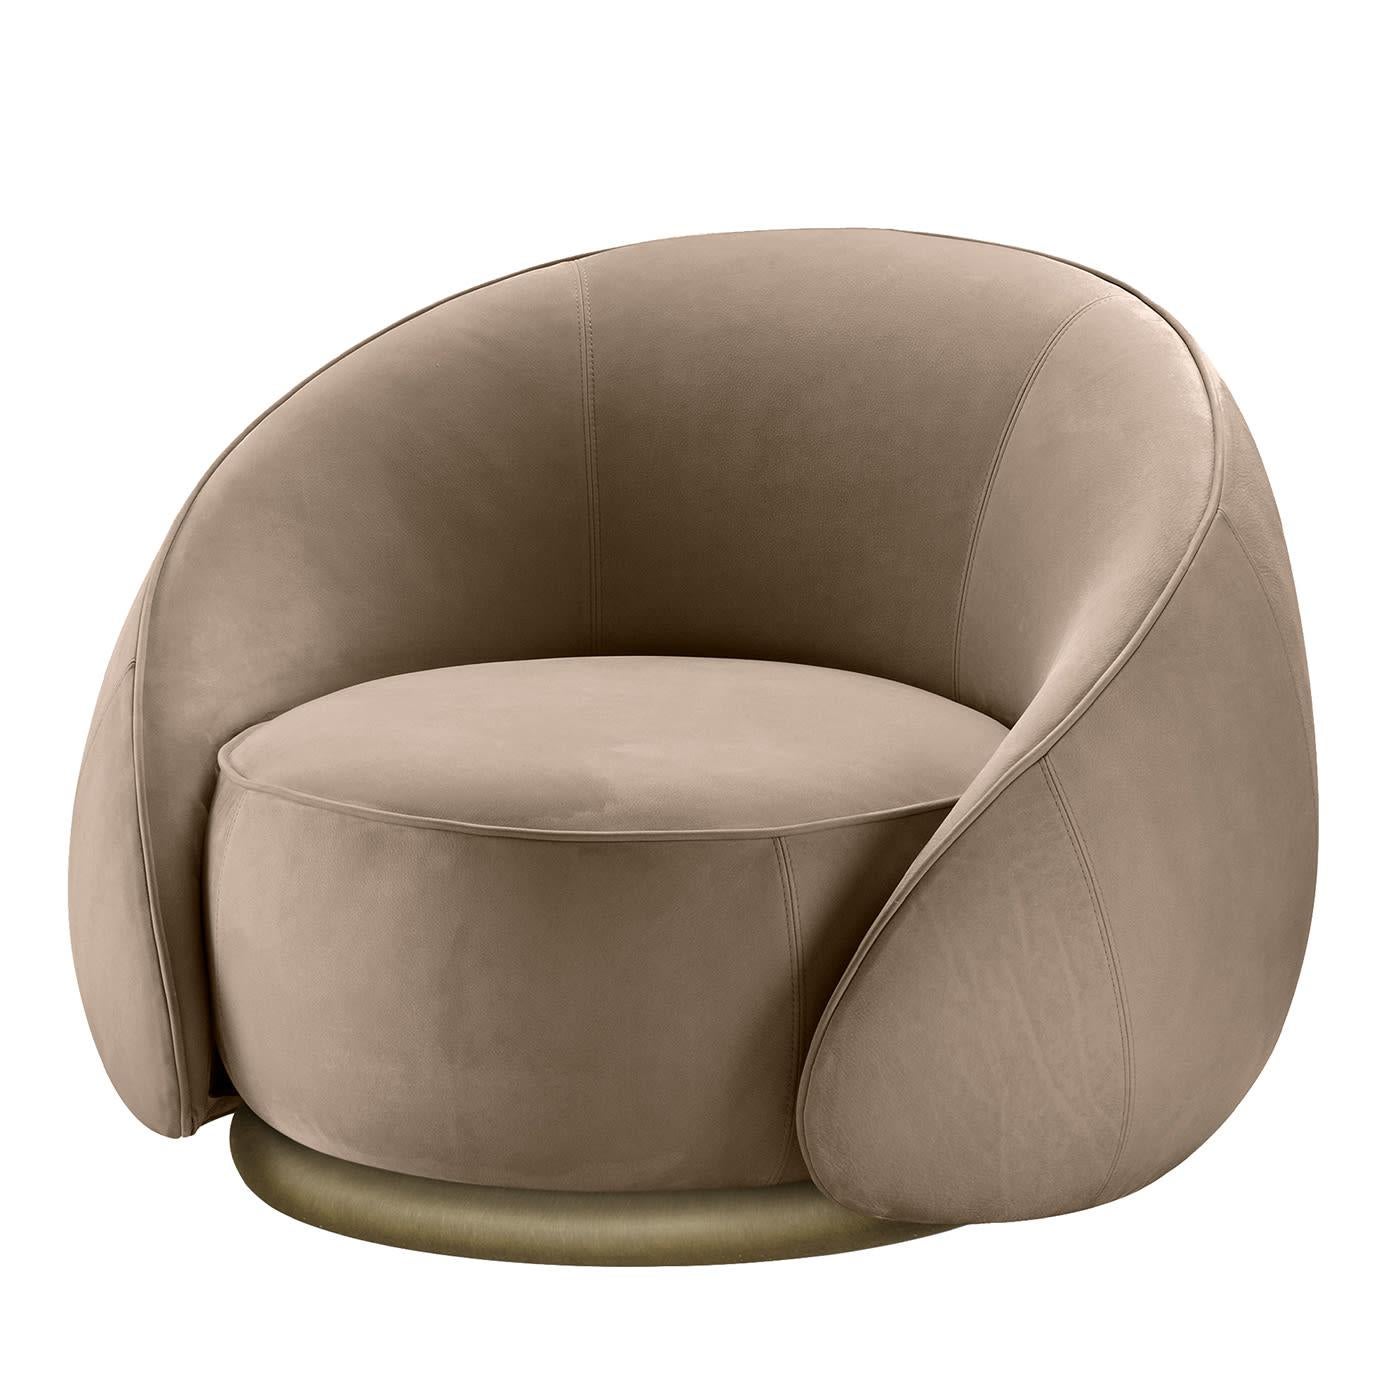 Marked by an enveloping backrest also incorporating the armrests in its sloping silhouette, this exquisite armchair is aptly named after the Italian for hugs. A luxurious taupe-hued leather upholstery is wrapped around the entire body, only